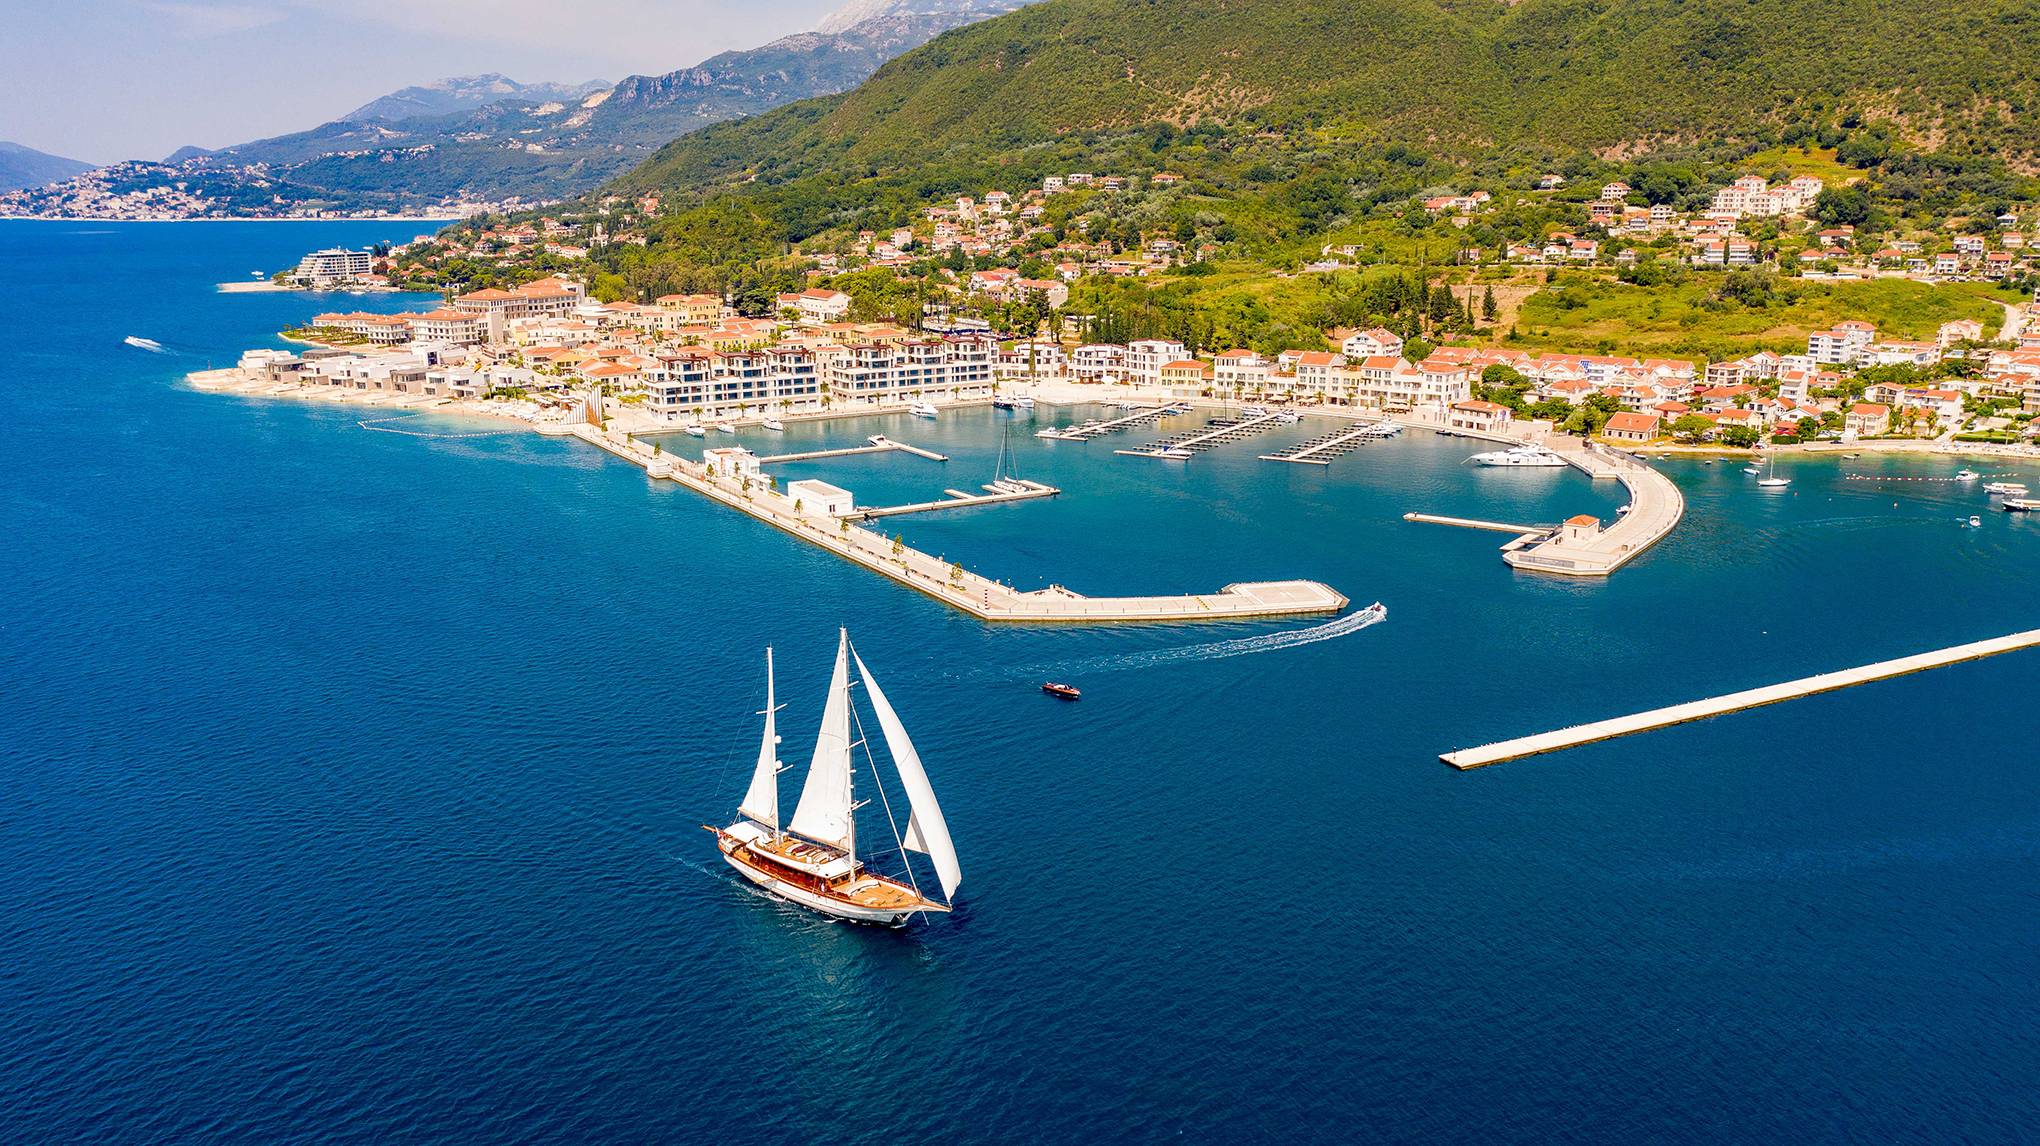 Portonovi - Montenegro: A Place Like No Other. Discover the Adriatic's Most Sophisticated New Destination